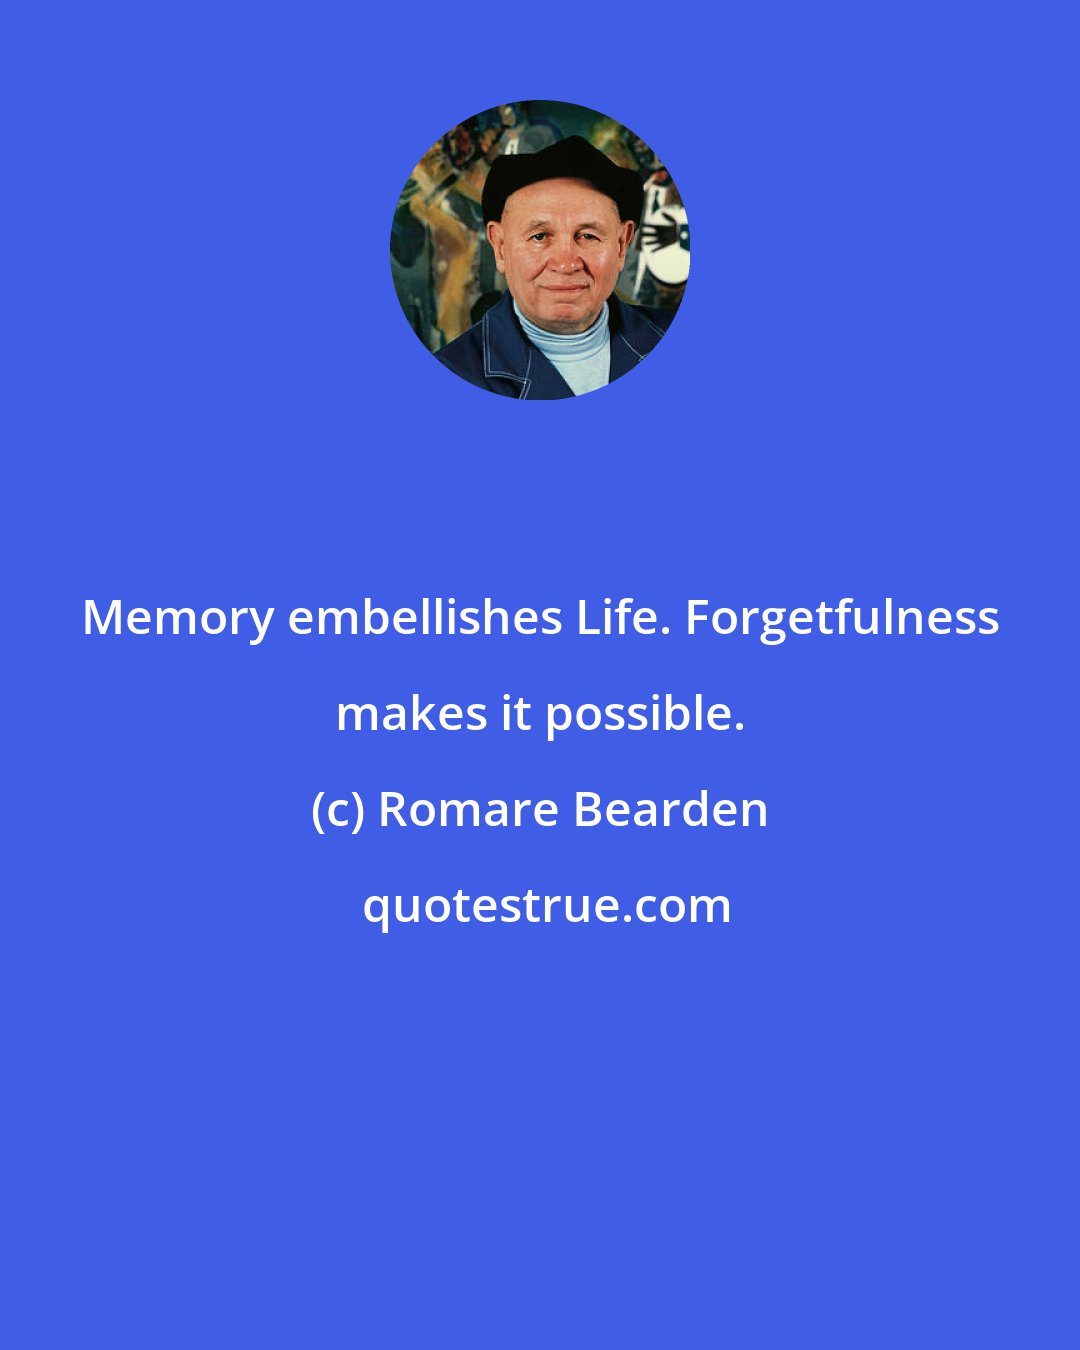 Romare Bearden: Memory embellishes Life. Forgetfulness makes it possible.